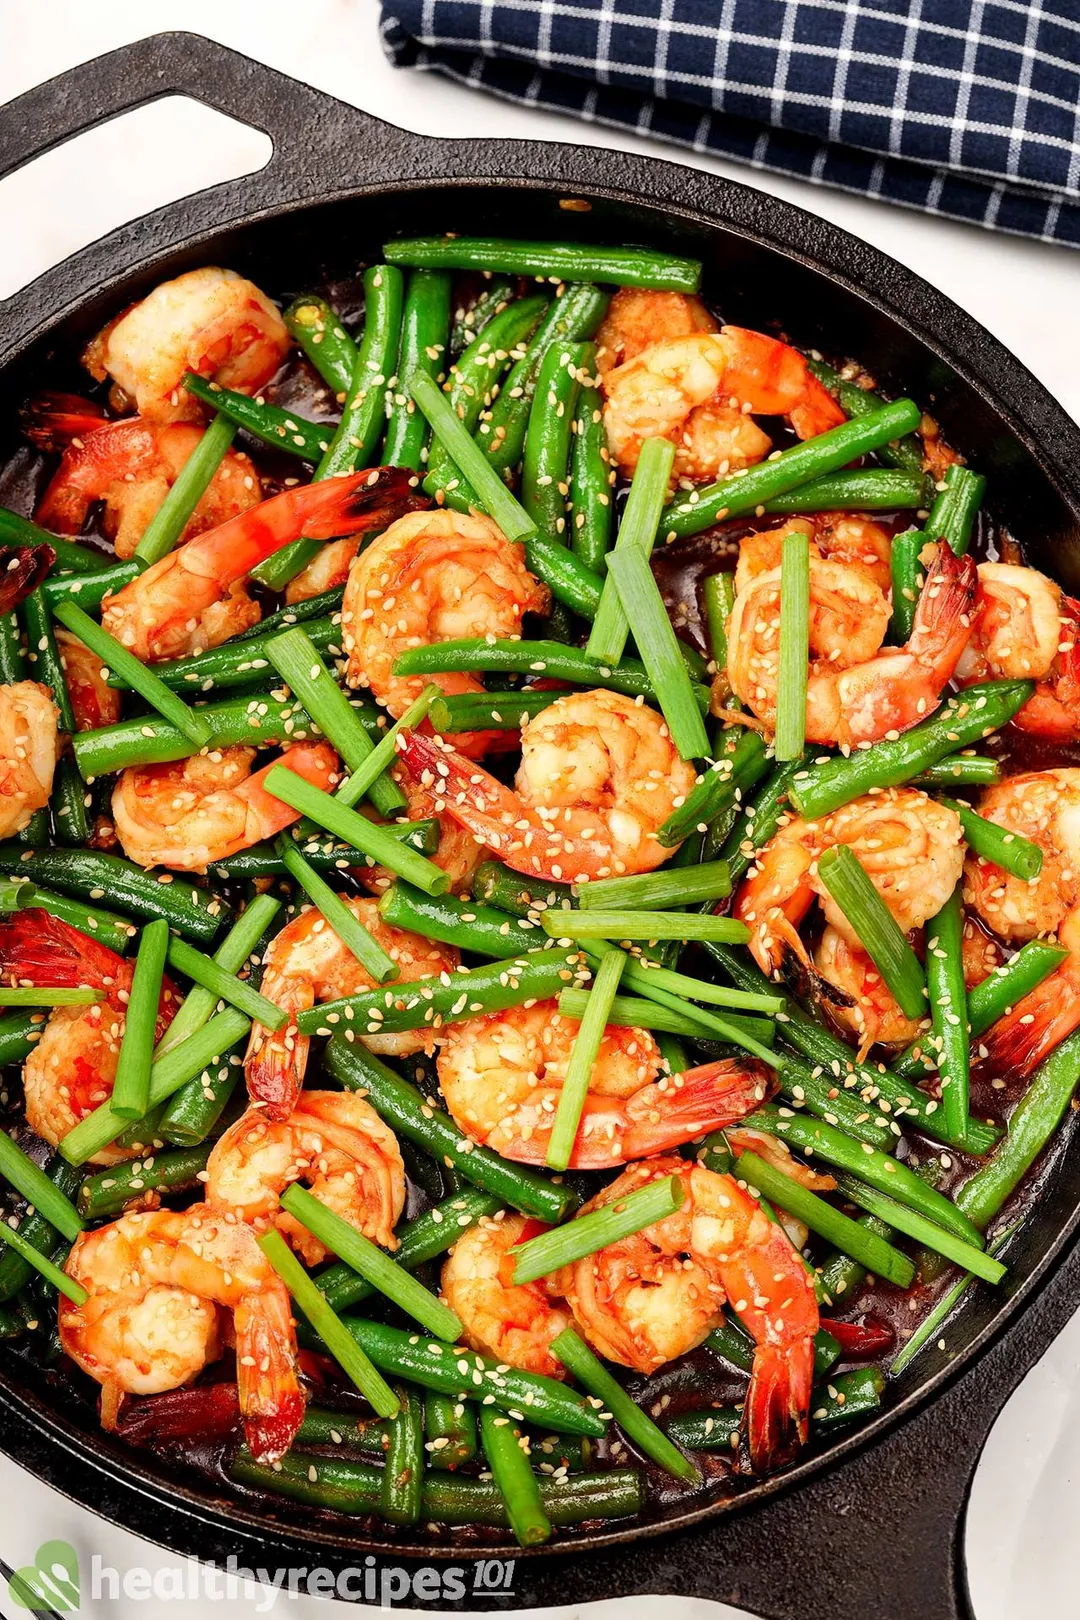 A close-up shot of red shrimp sauteed with green beans and sprinkled with white sesame seeds